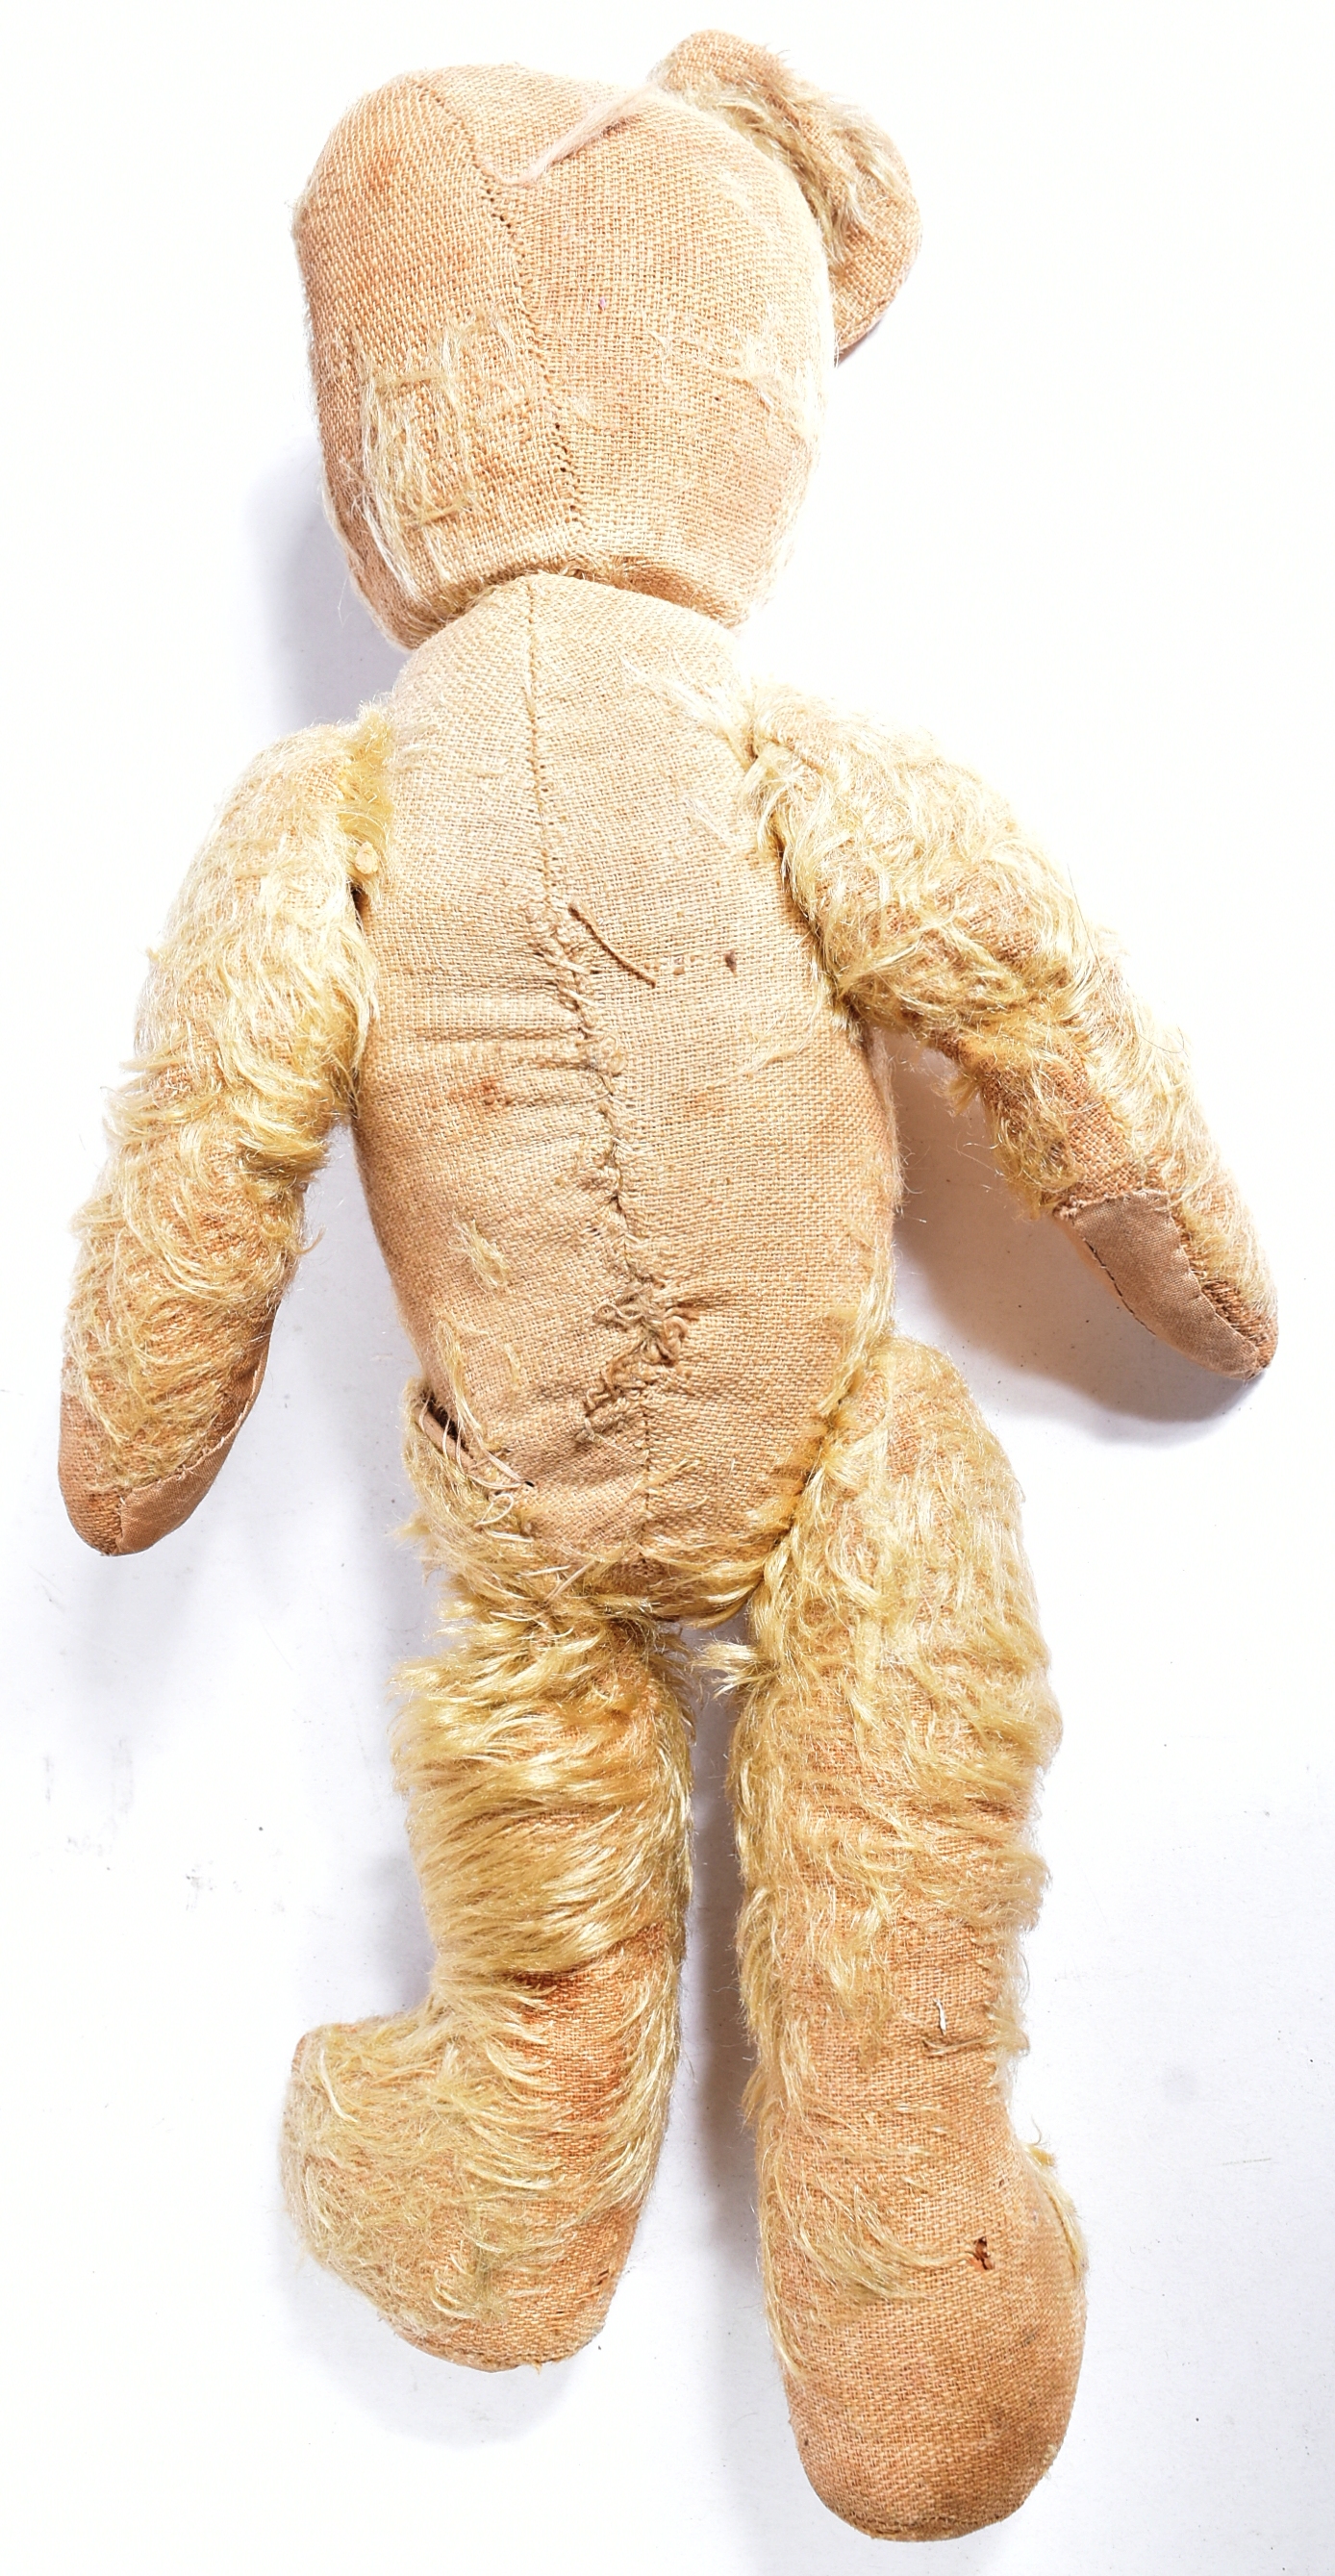 EARLY 20TH CENTURY TEDDY BEAR WITH GROWLER - Image 5 of 5